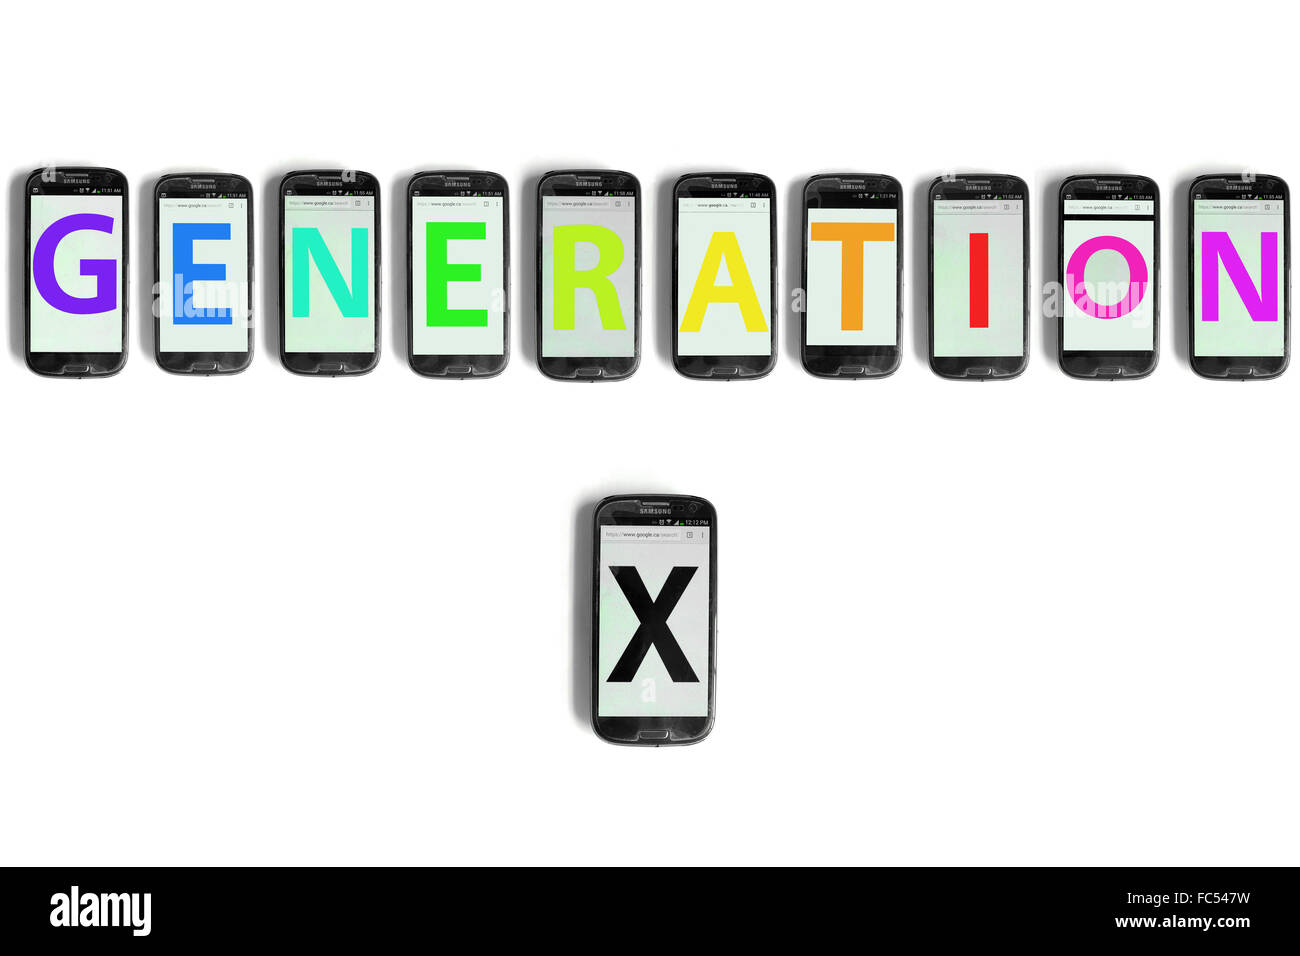 Generation X written on the screens of smartphones photographed against a white background. Stock Photo